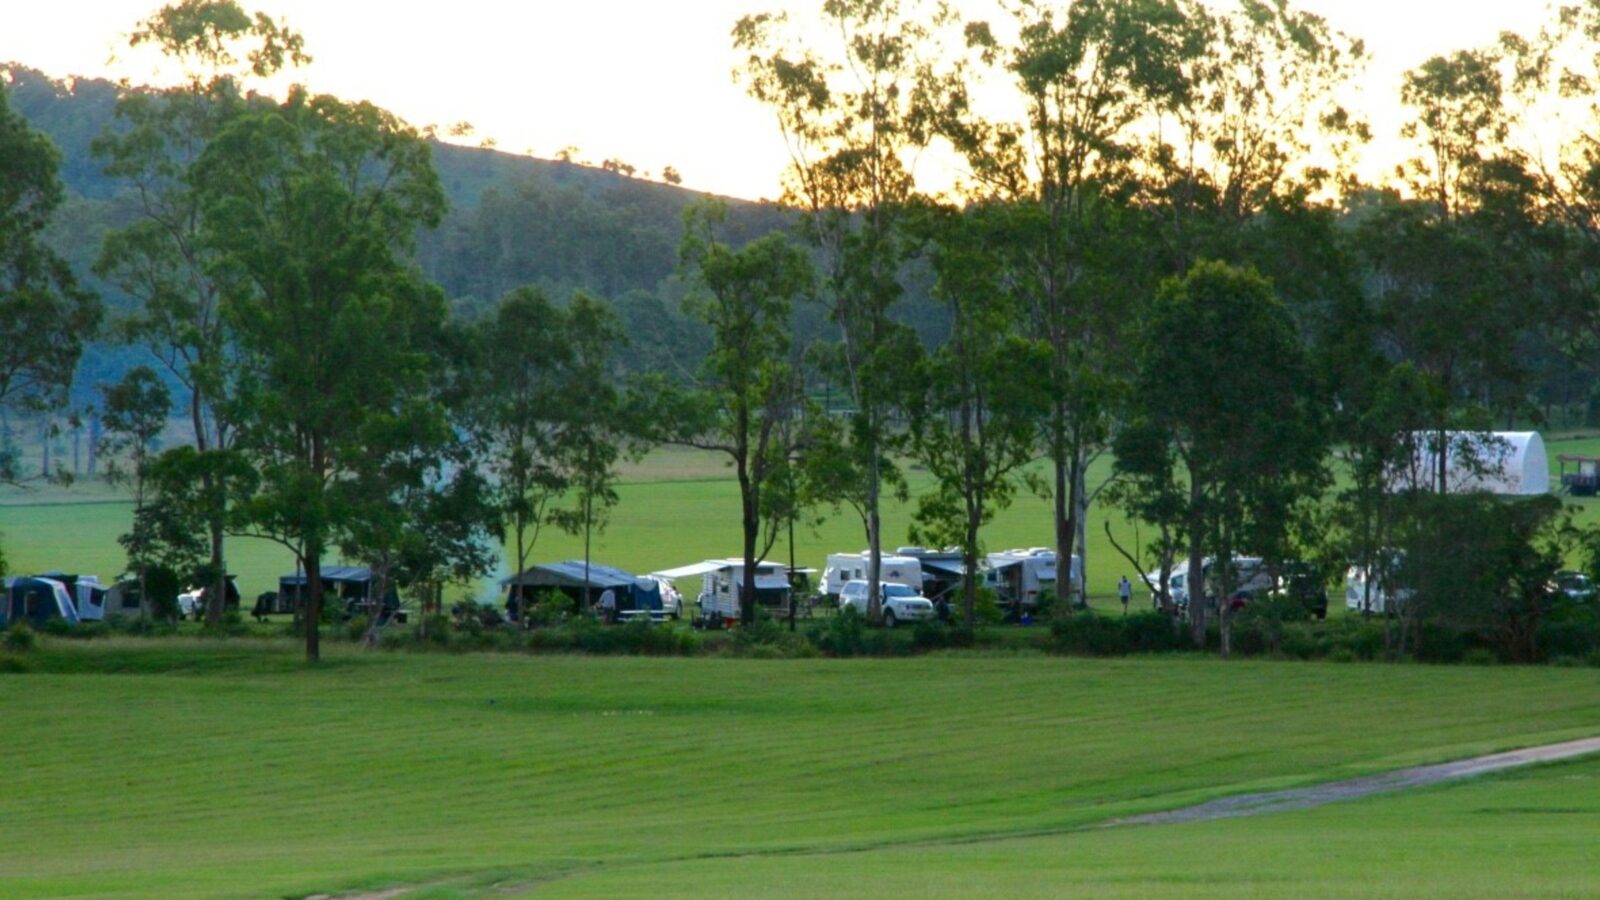 Campground area beside creek